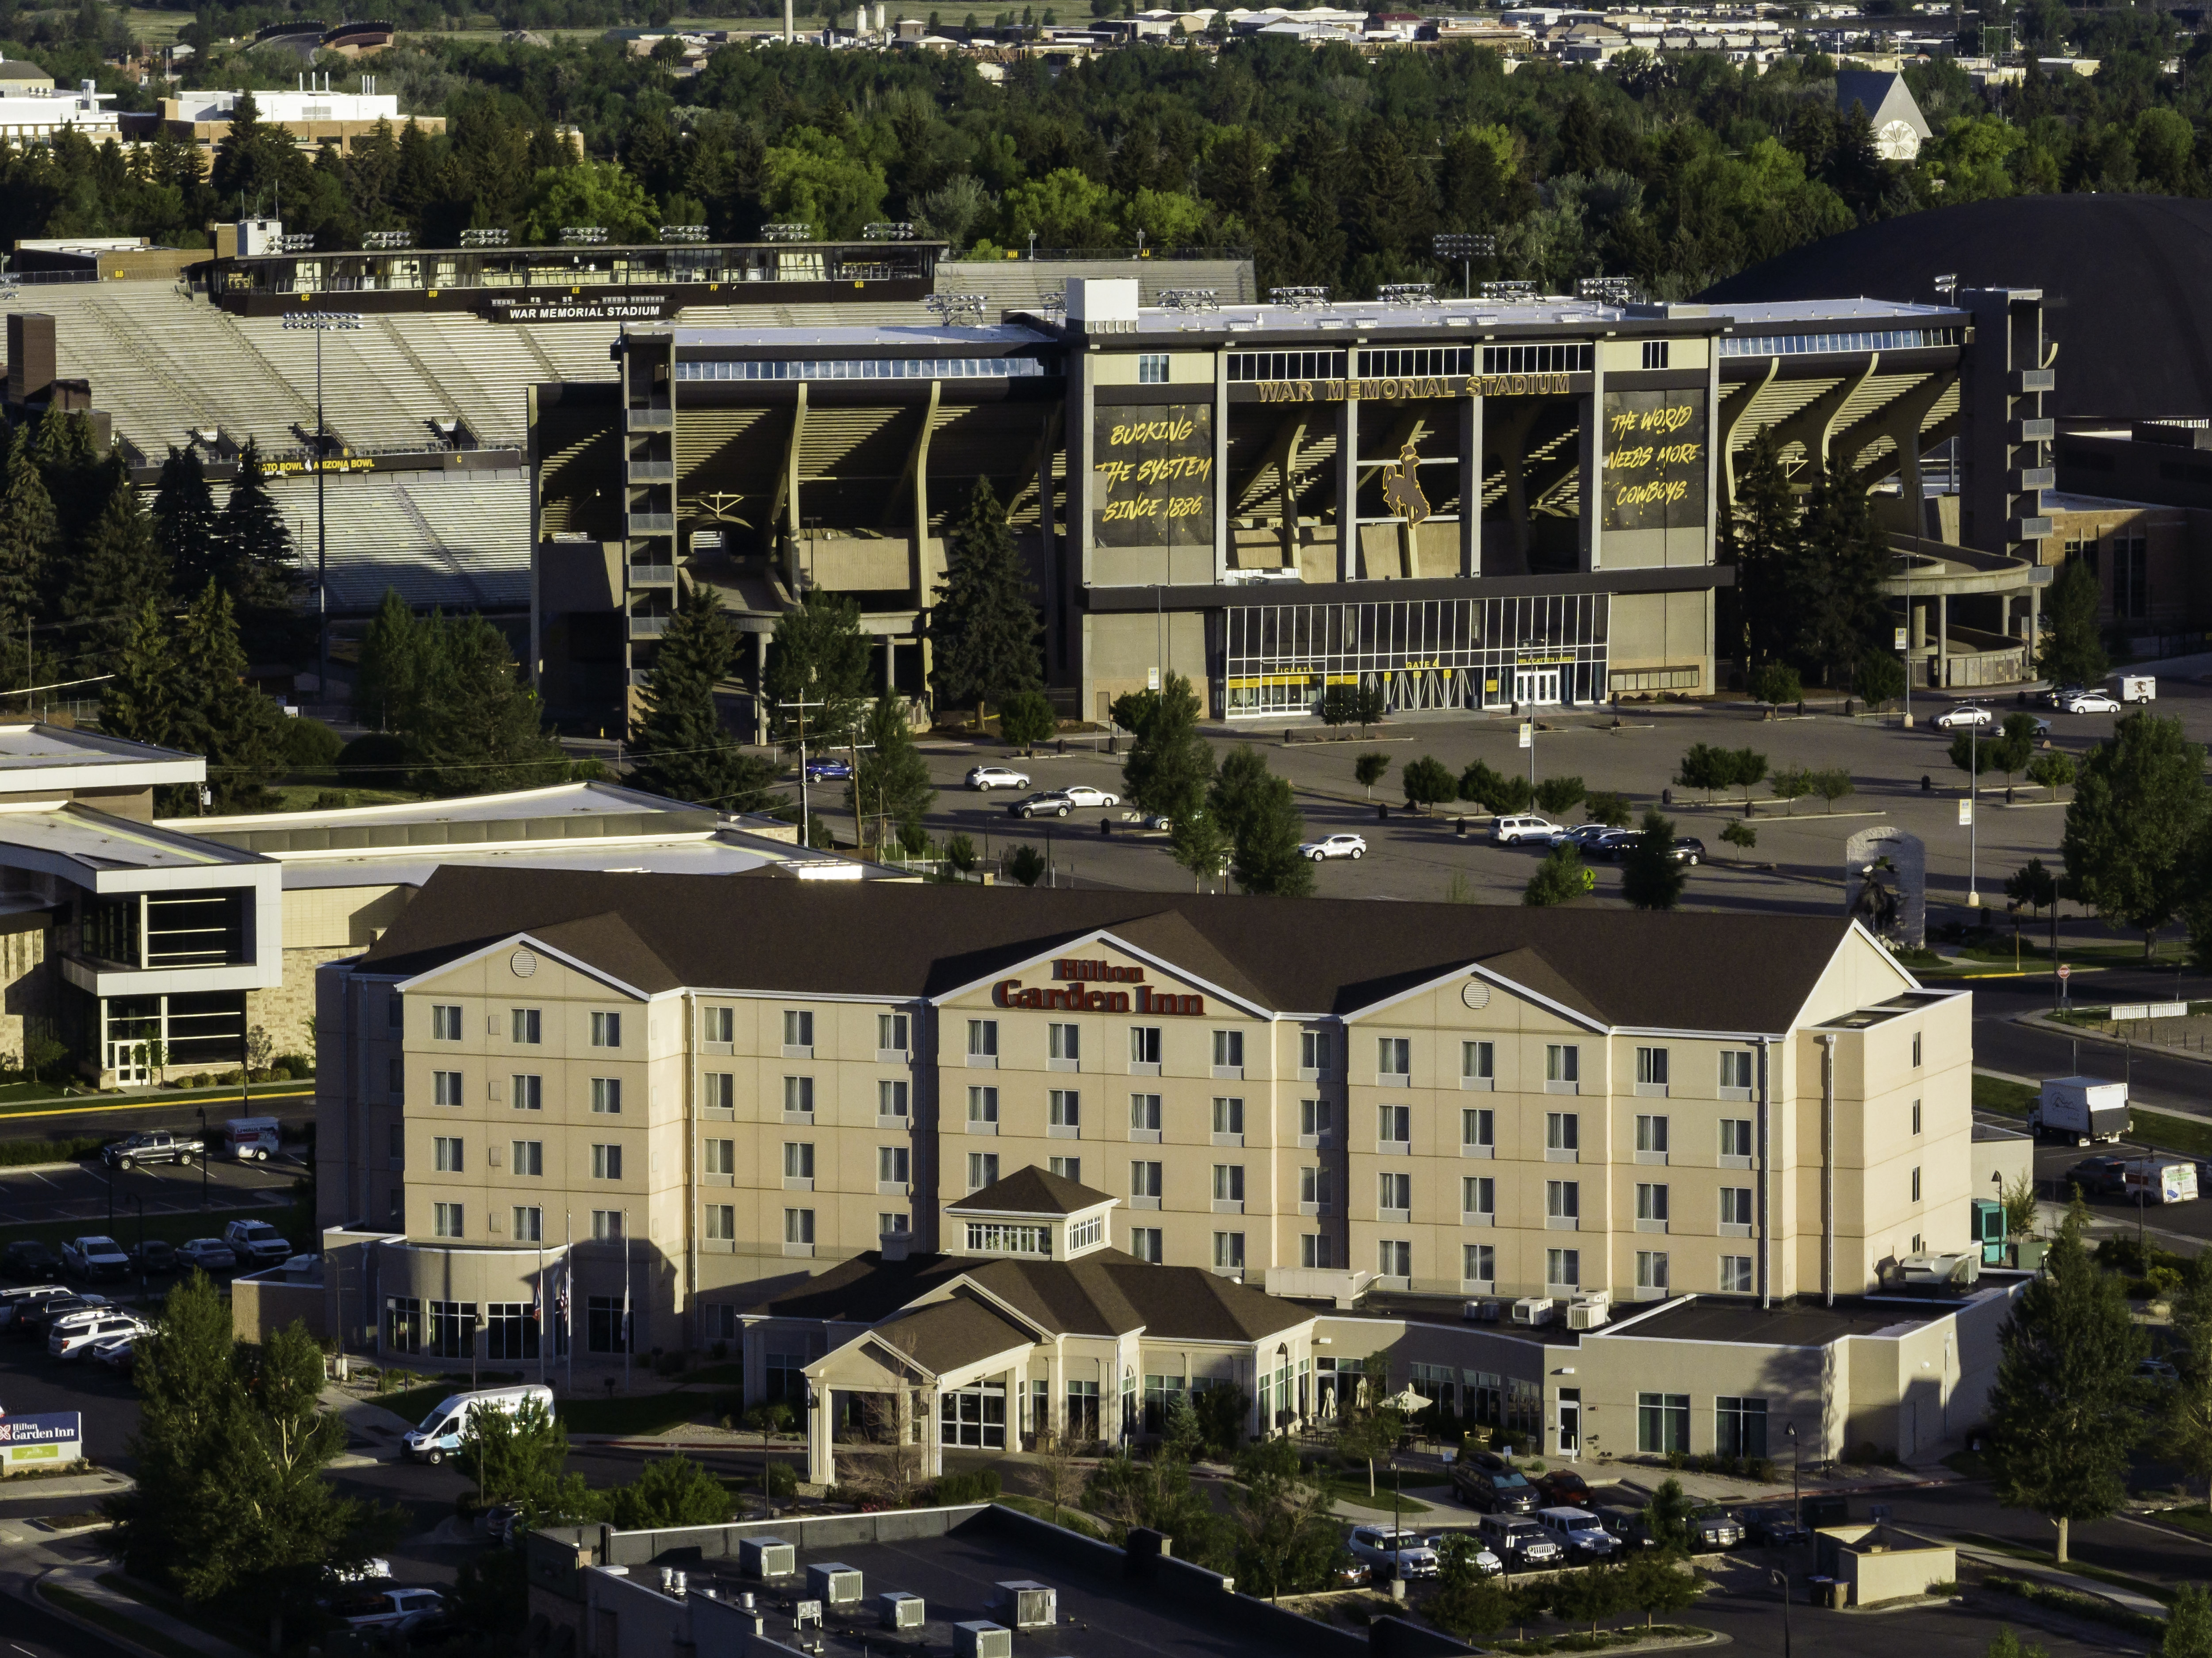 Aerial View of hotel with football stadium behind